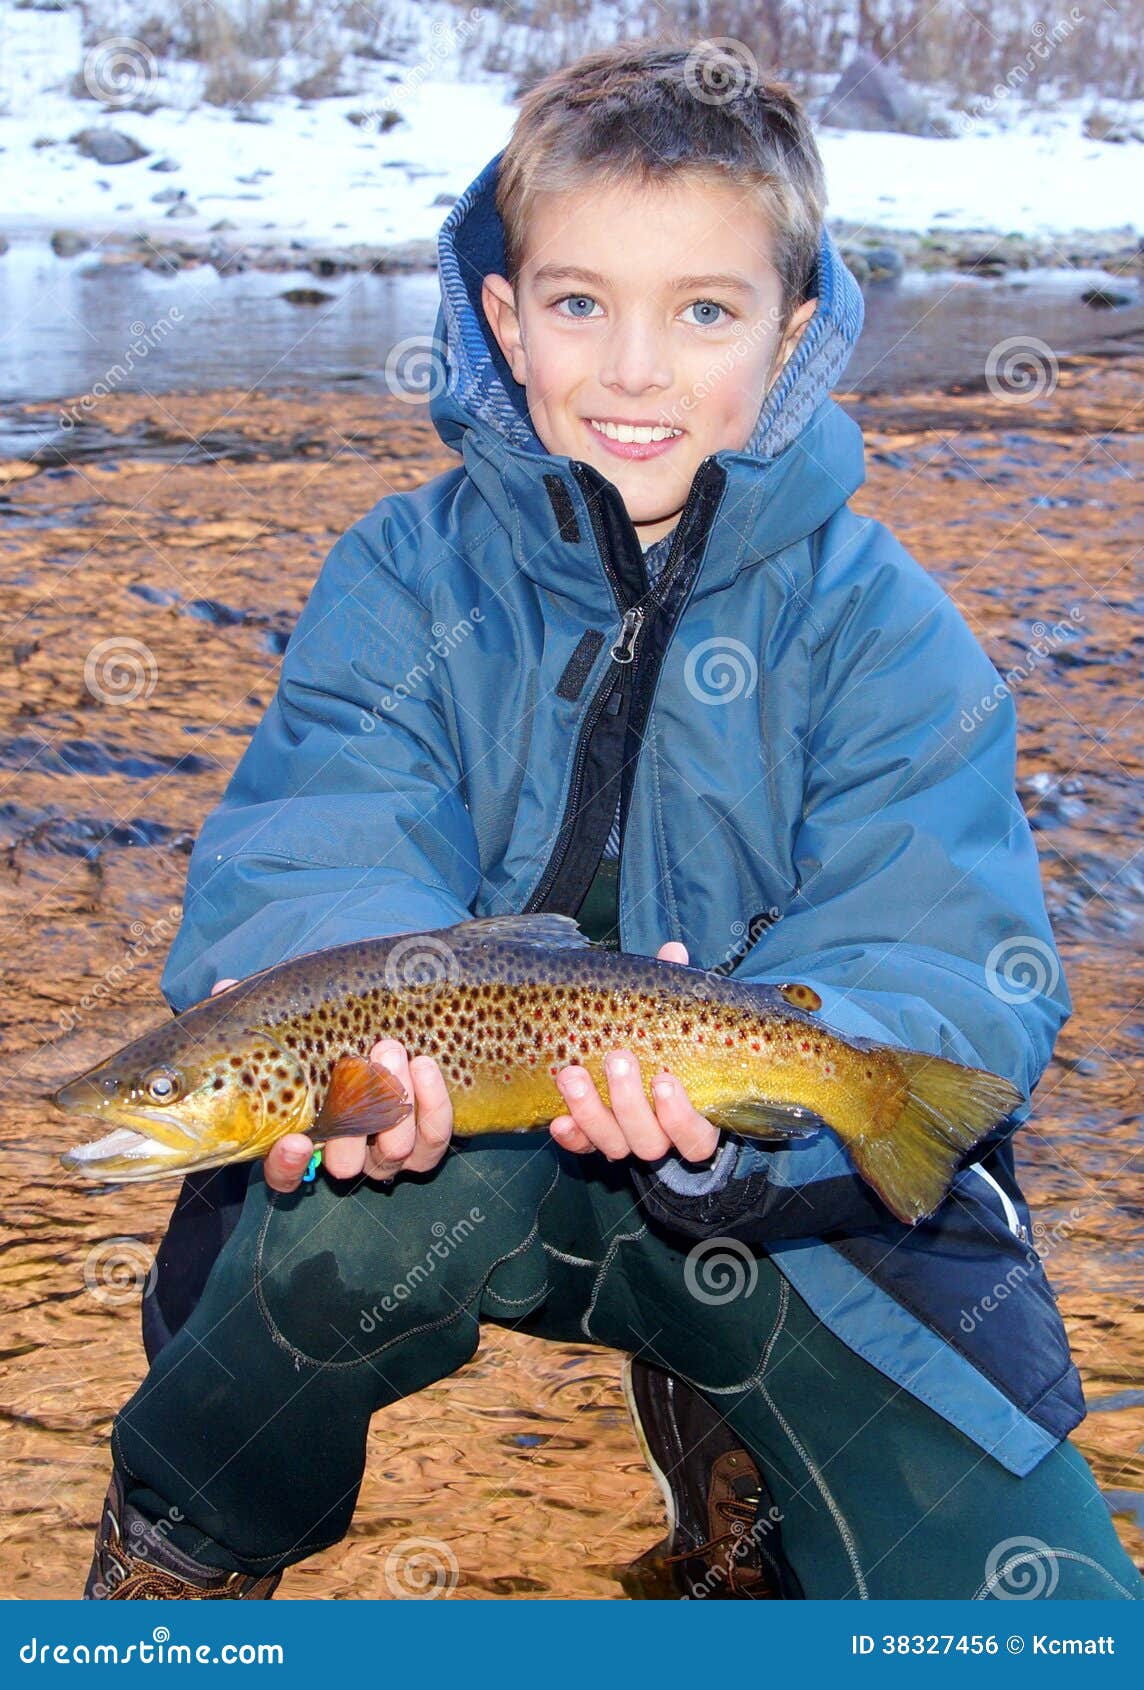 Young Man Hold Big Rainbow Trout in His Hands. Stock Image - Image